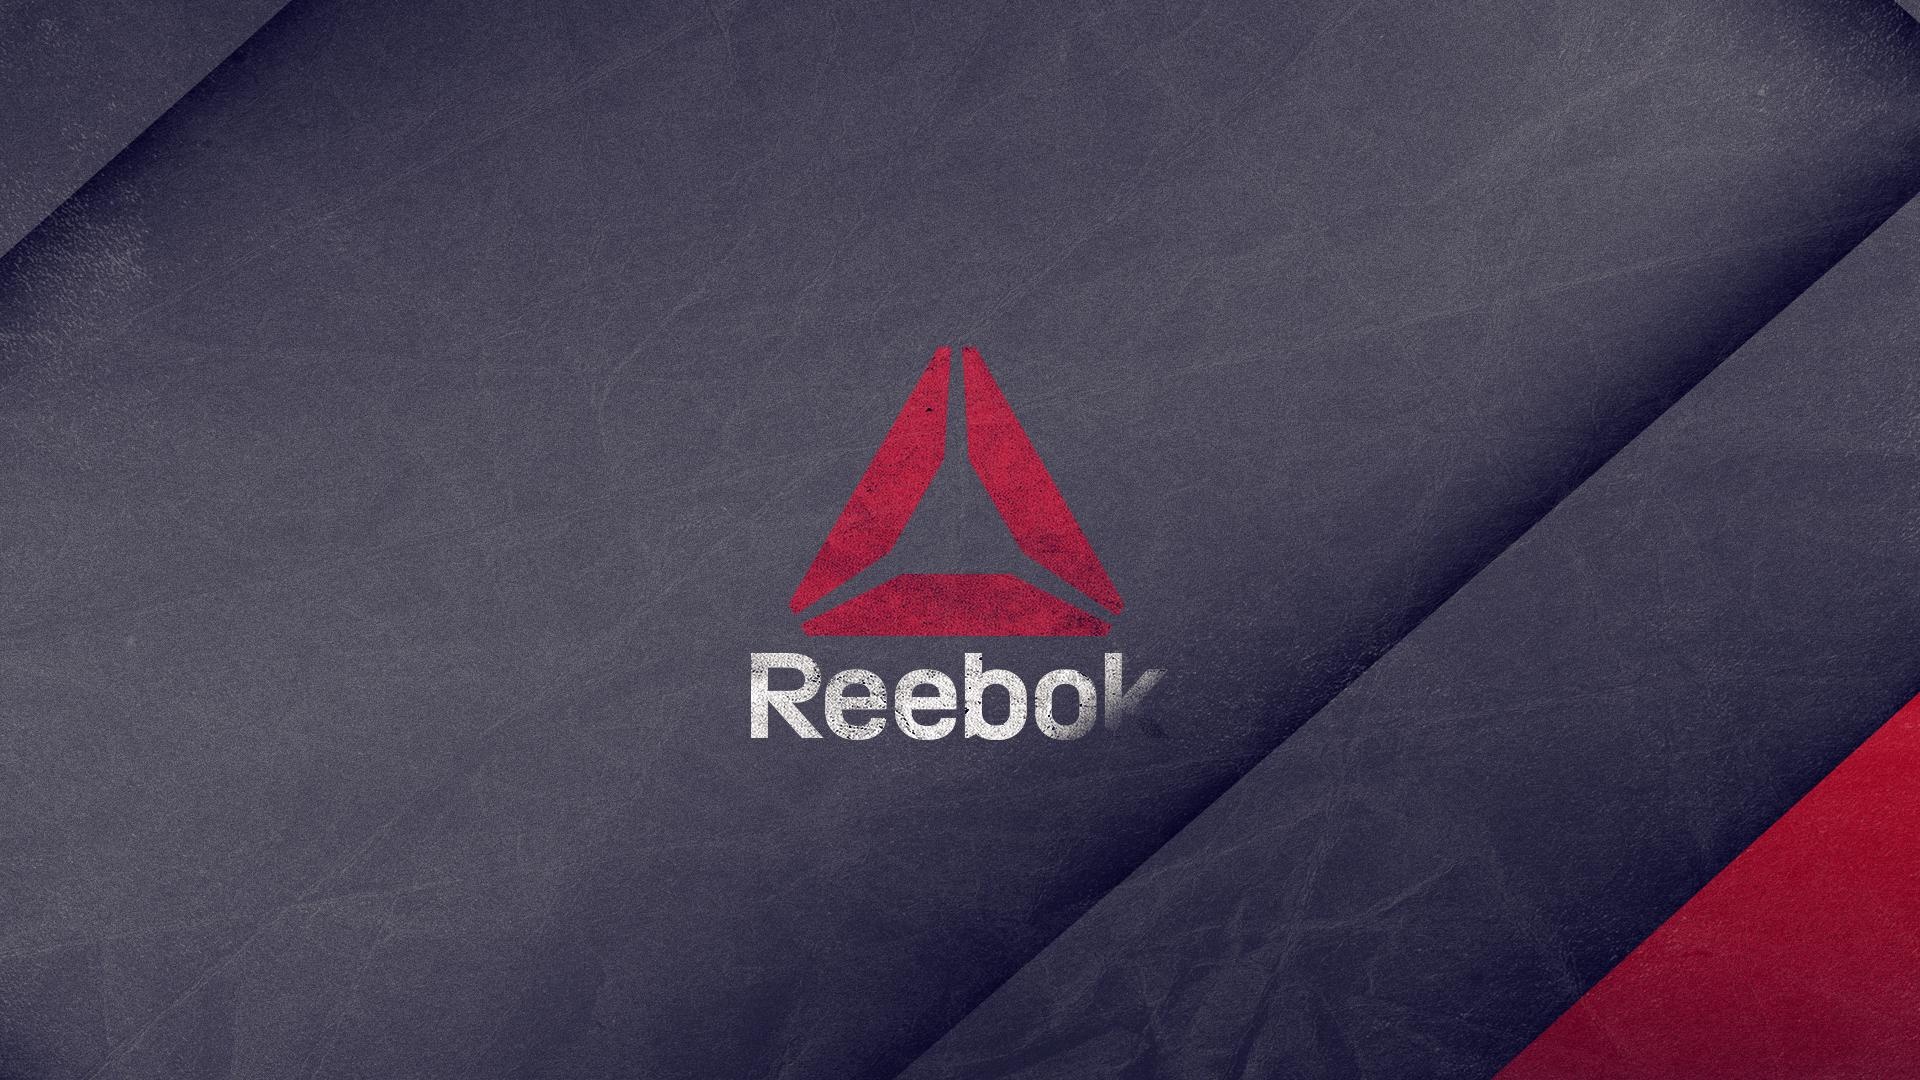 Reebok: A partnership with CrossFit, A fitness company and competitive fitness sport, 2010. 1920x1080 Full HD Background.